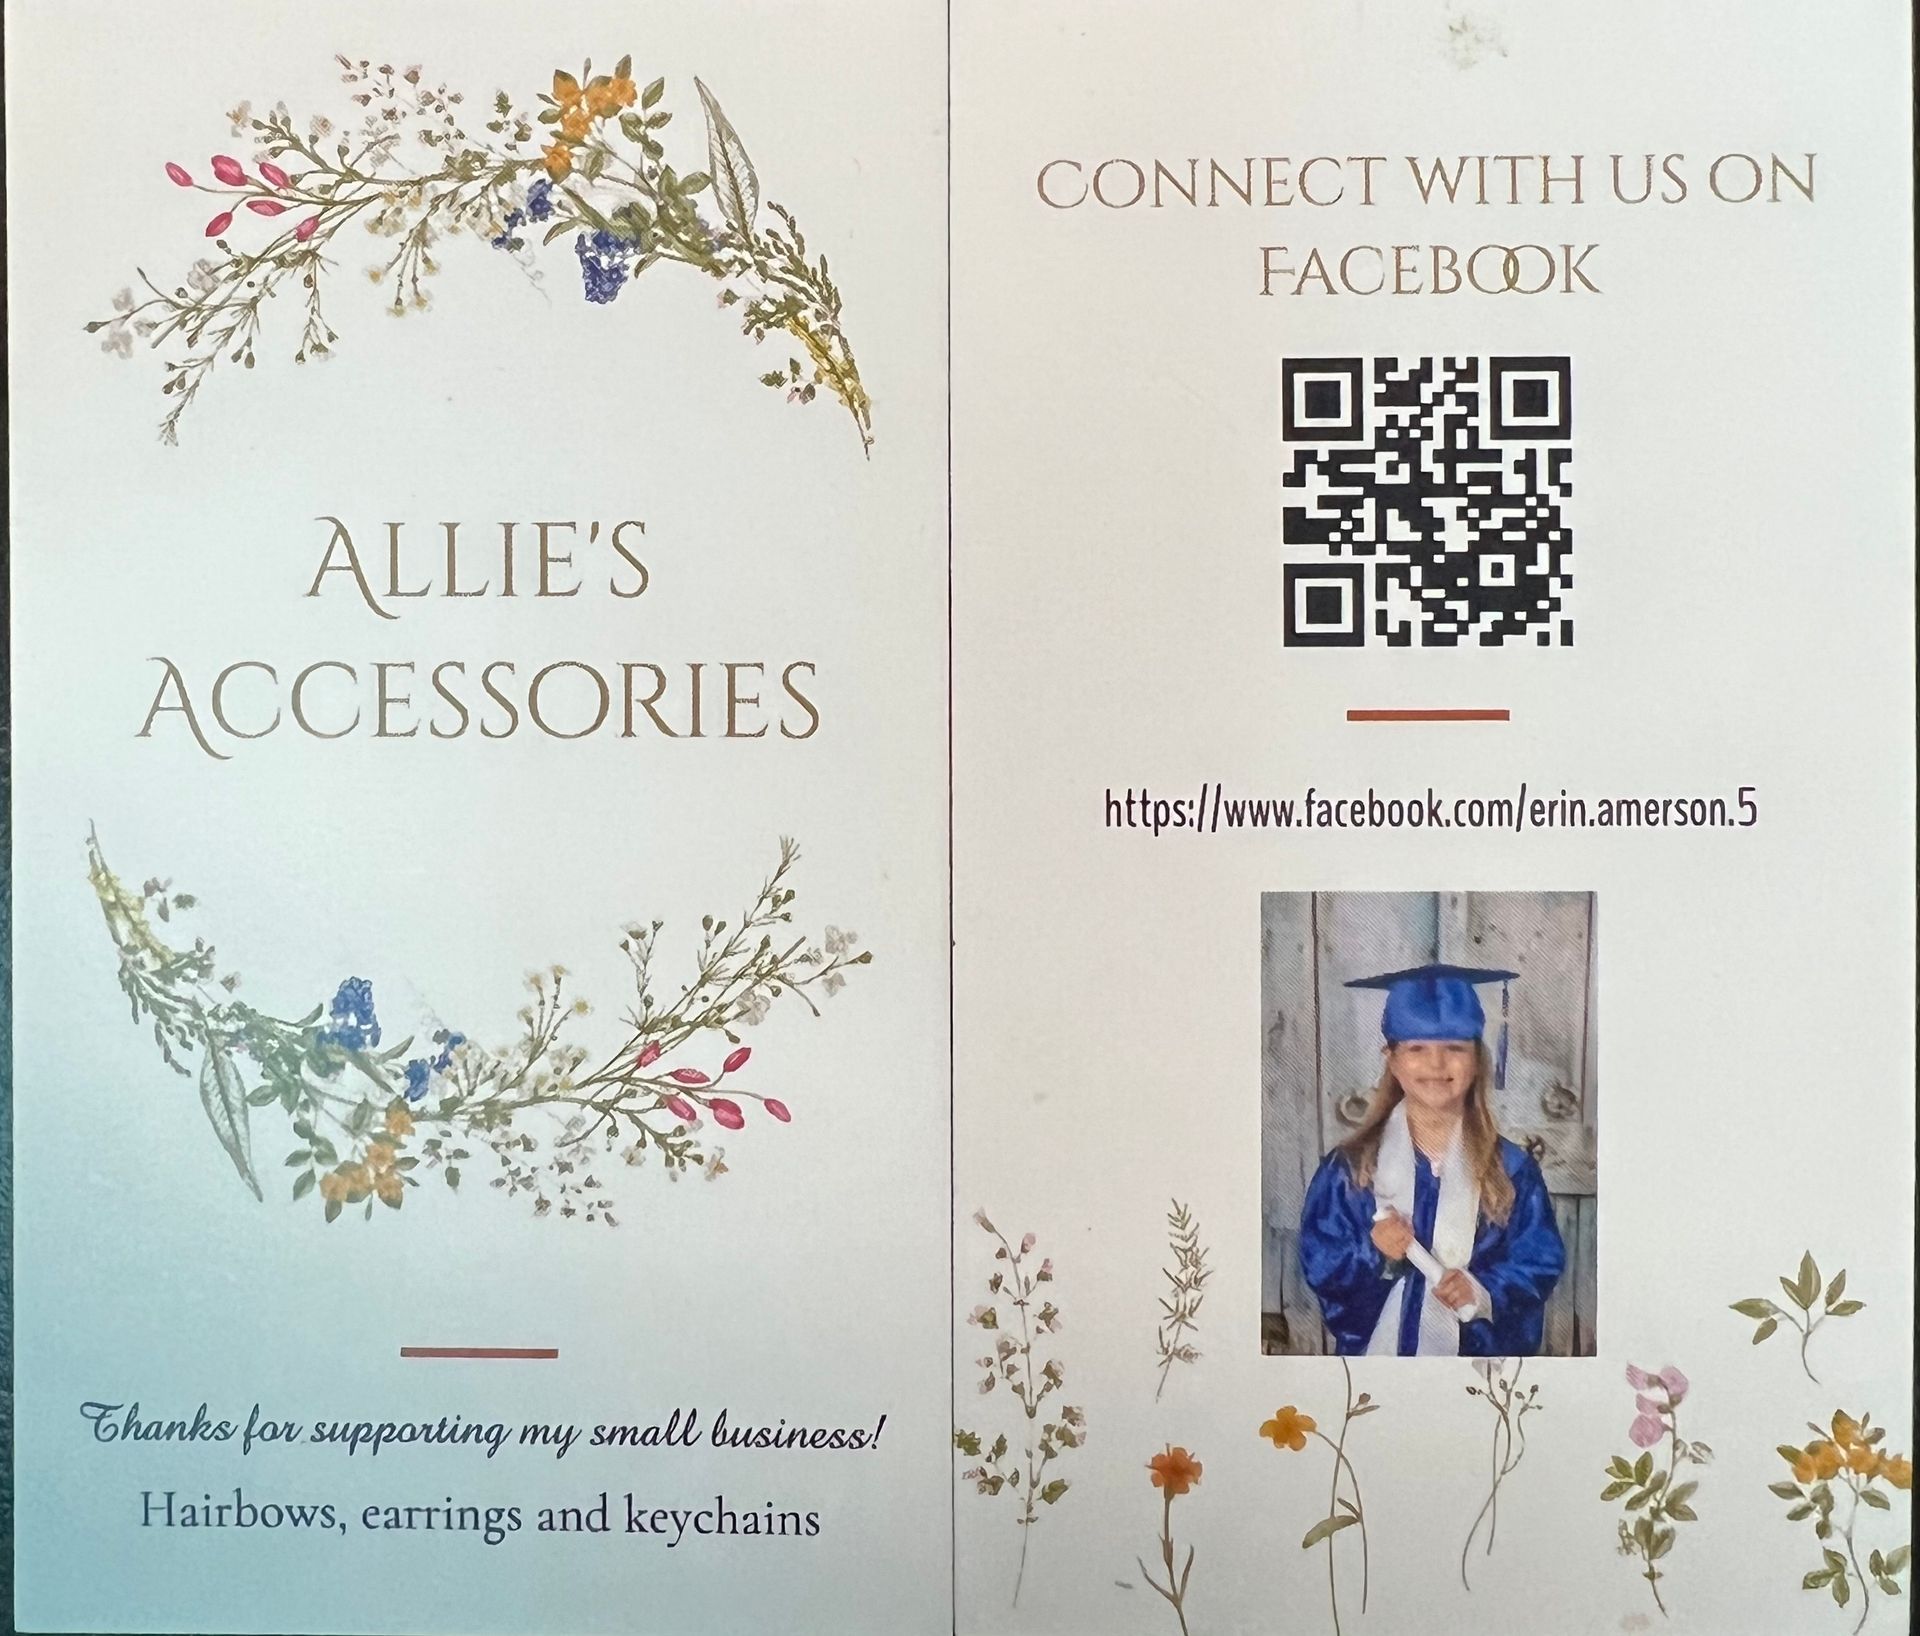 an advertisement for allie 's accessories with a picture of a girl in a graduation cap and gown